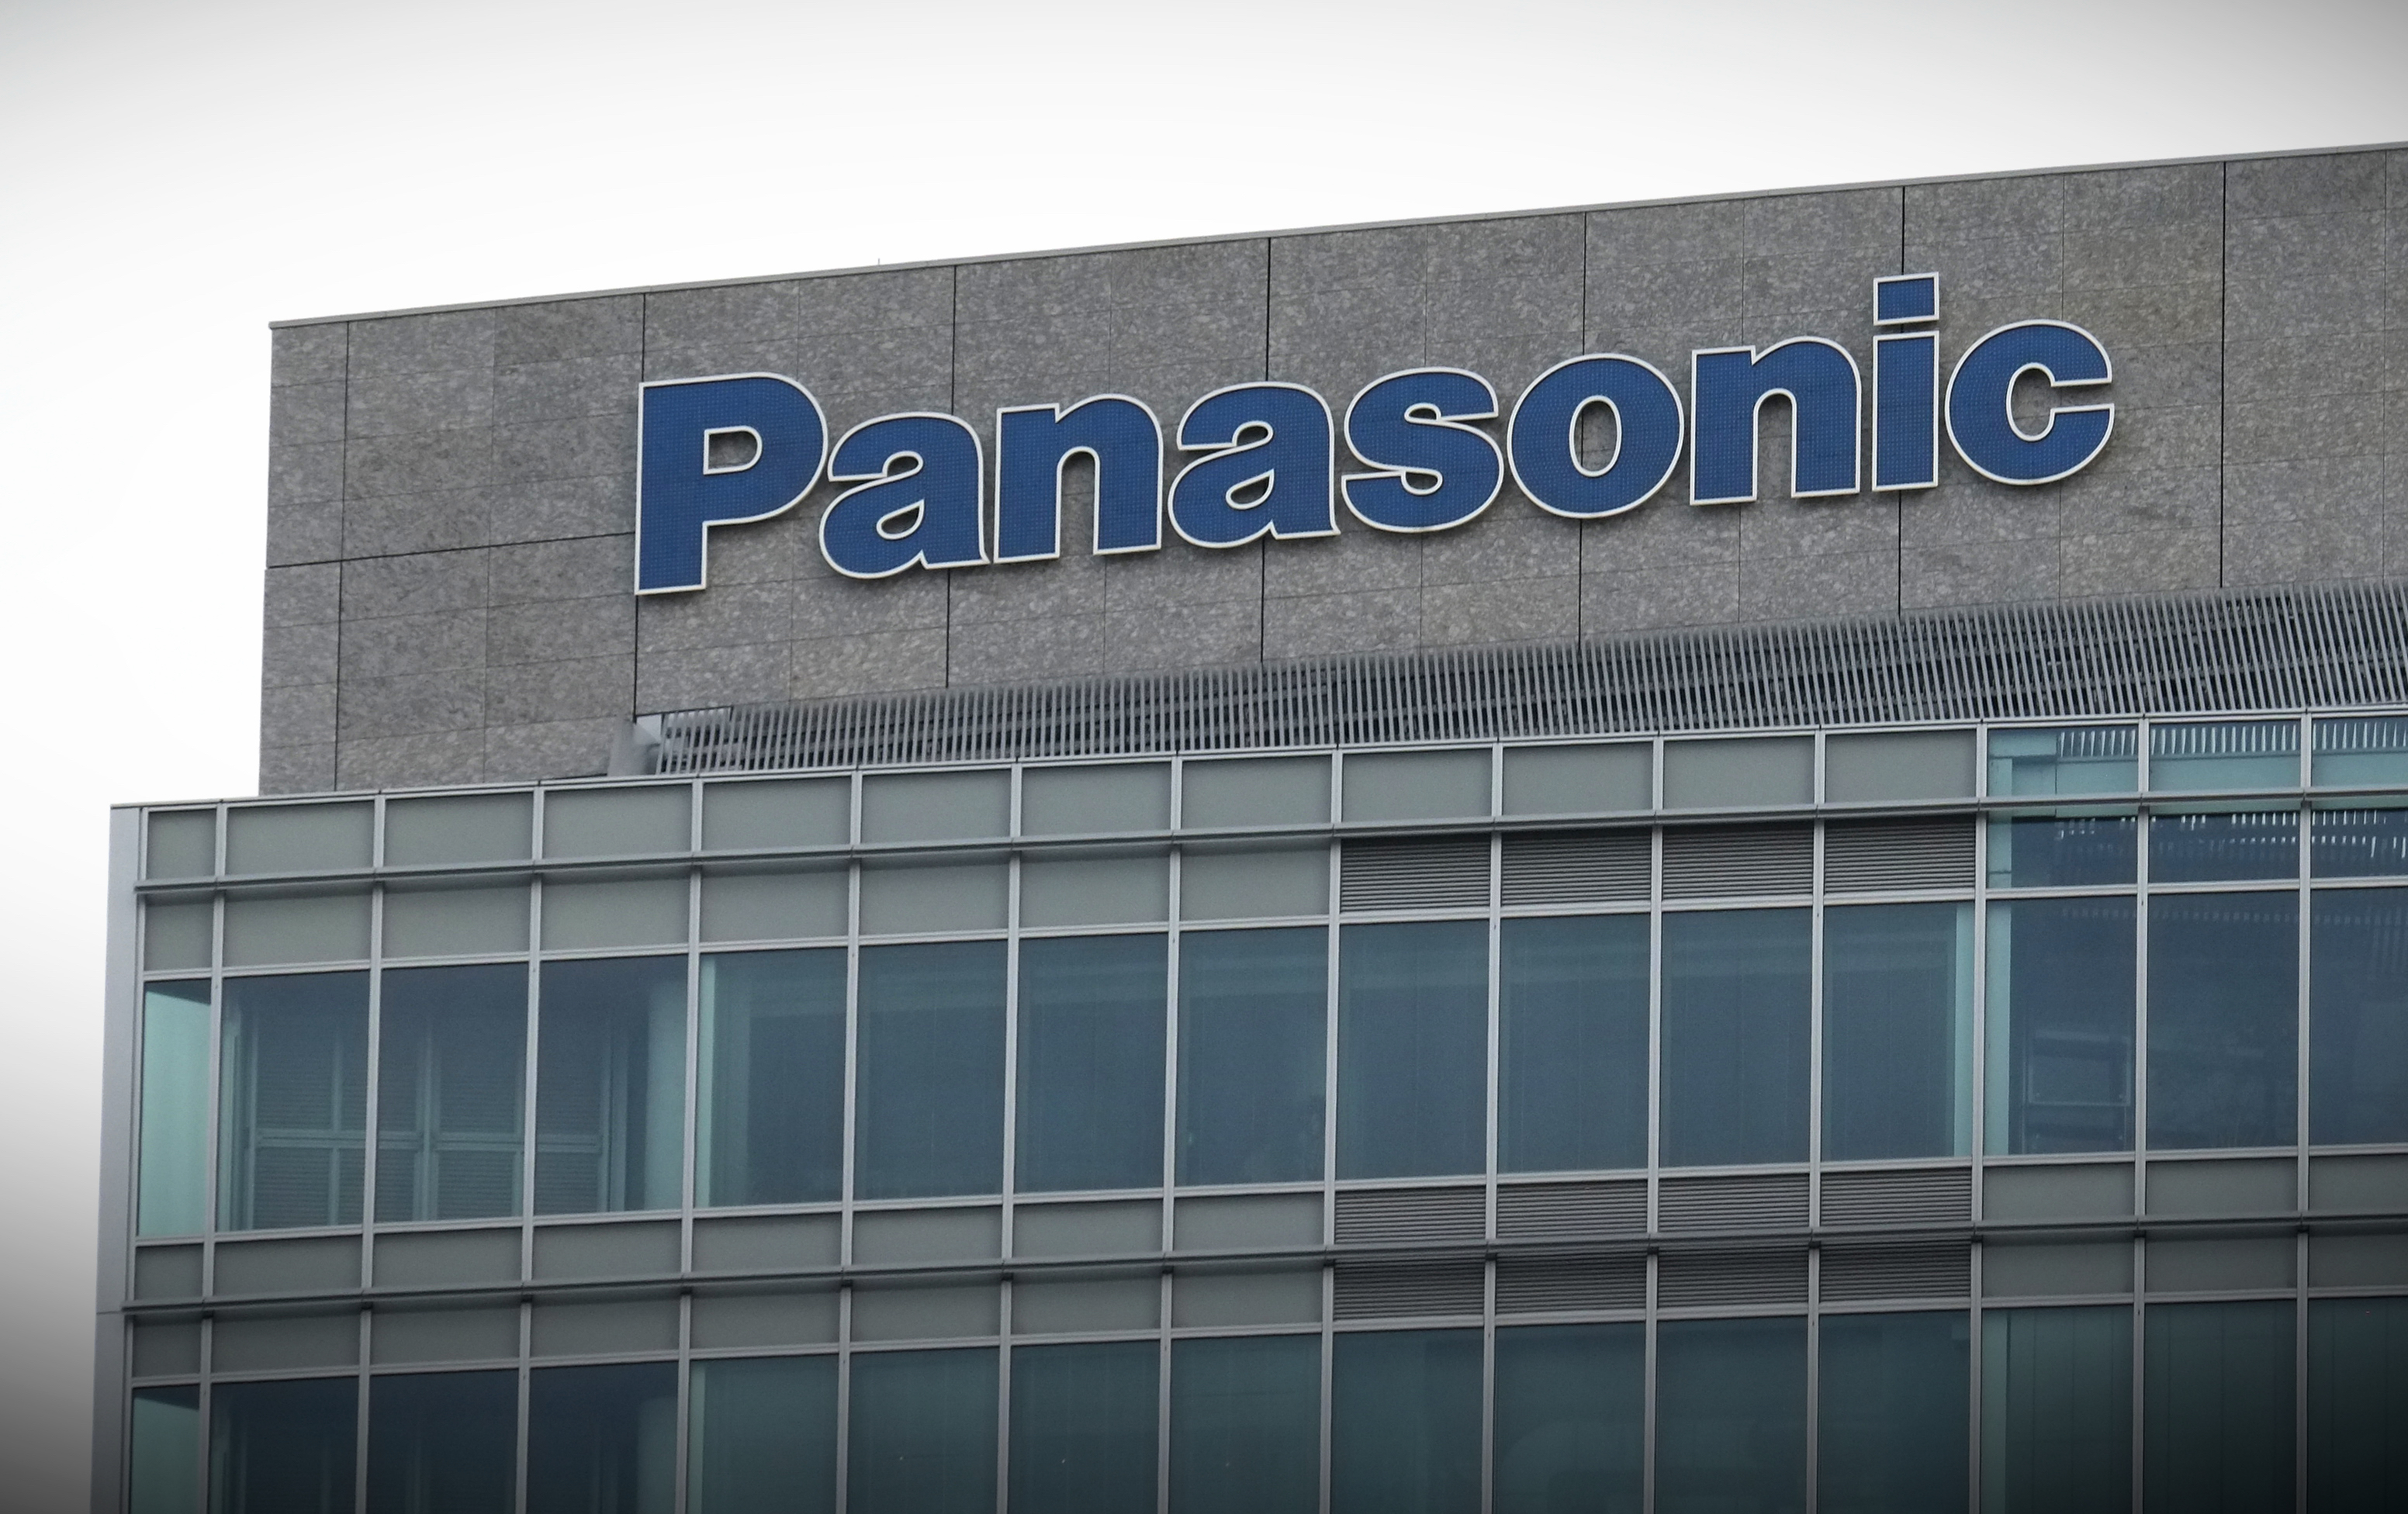 panasonic says hackers accessed personal data of job candidates | techcrunch